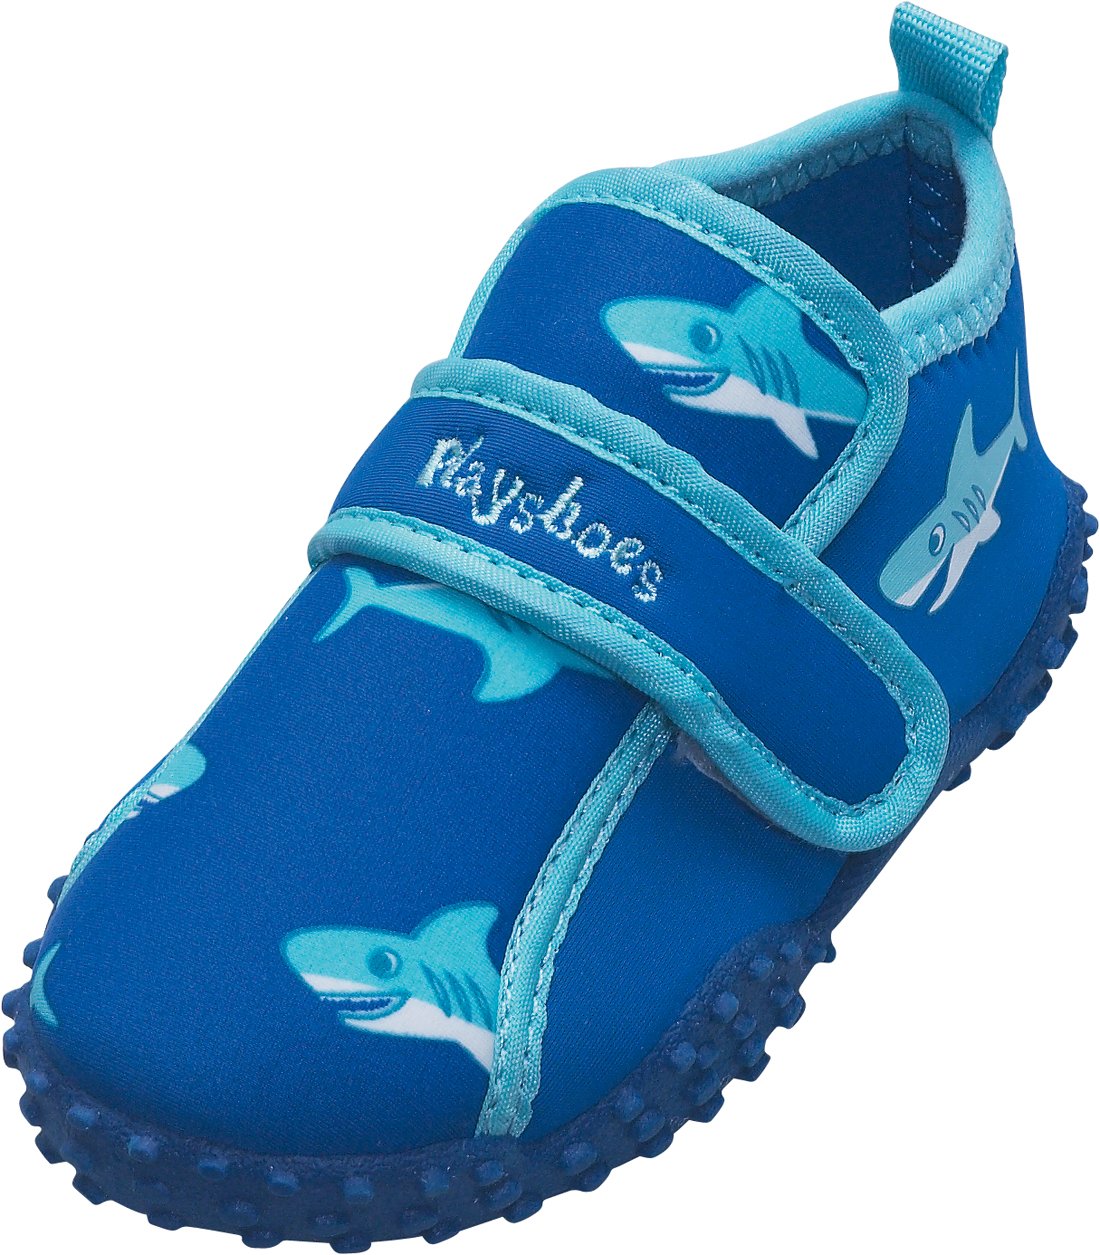 Playshoes Unisex Kids Beach Footwear with Uv Protection Anchor Water Shoes